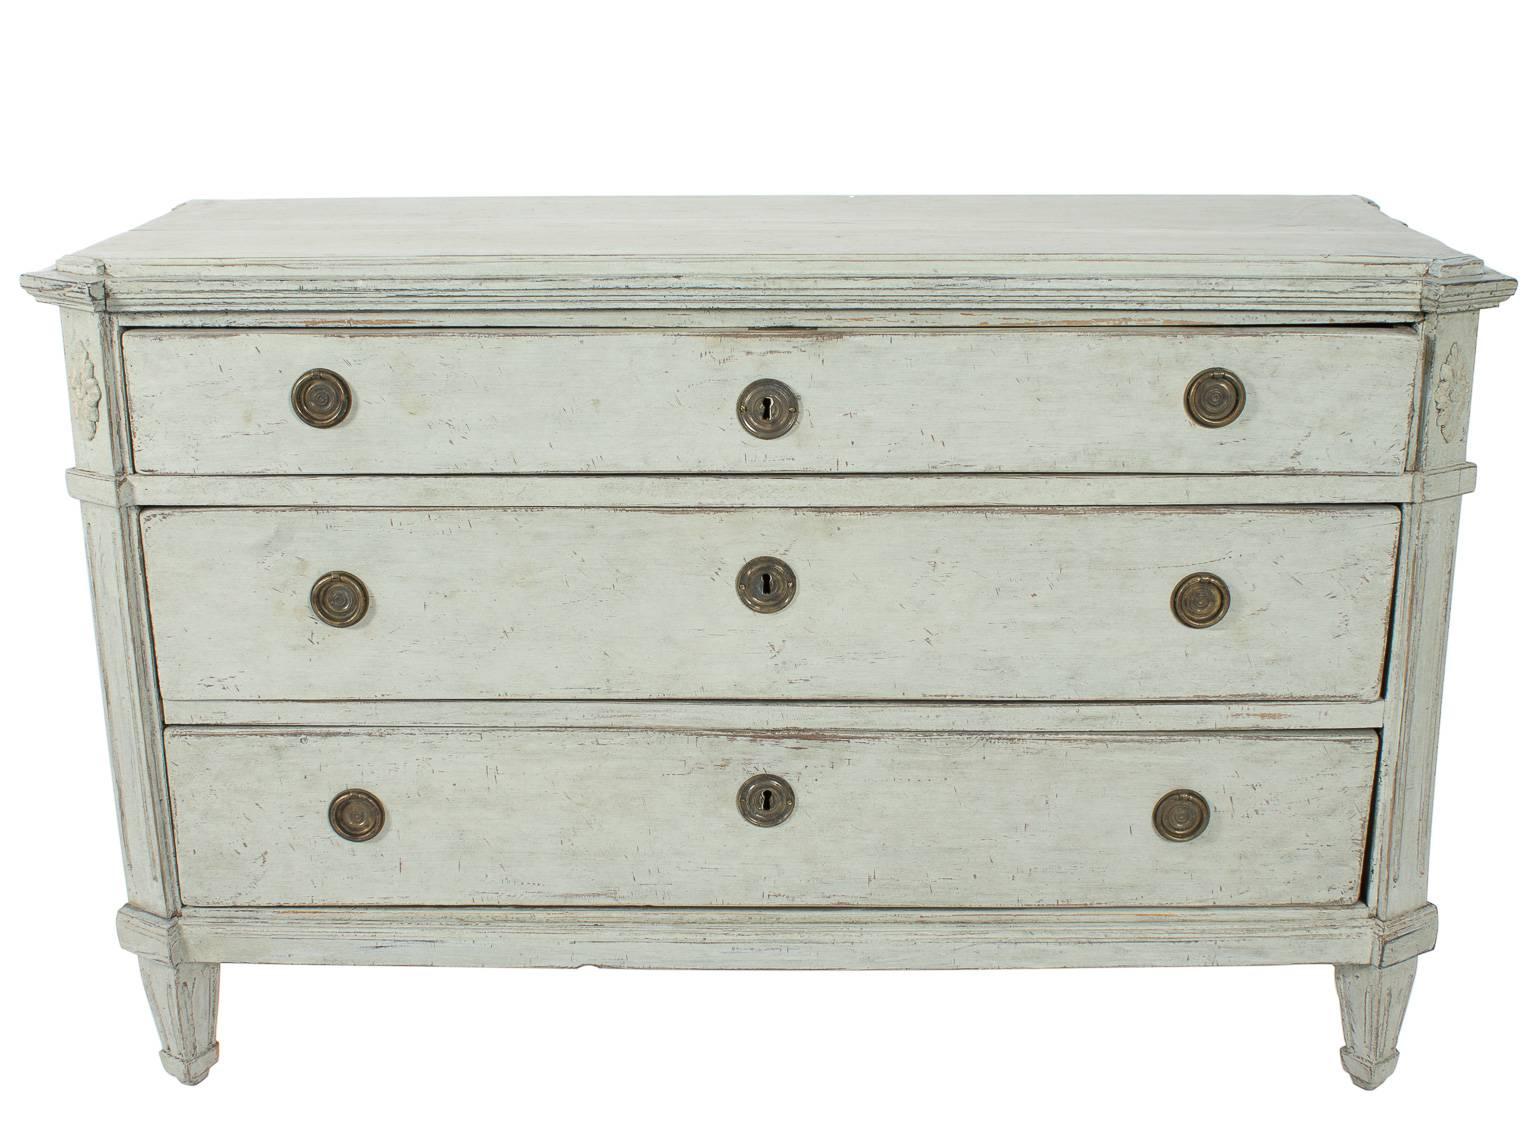 Late 19th century Swedish white-painted Gustavian-style dressers. Each with floral fluted detailing, three drawers, and brass fittings.